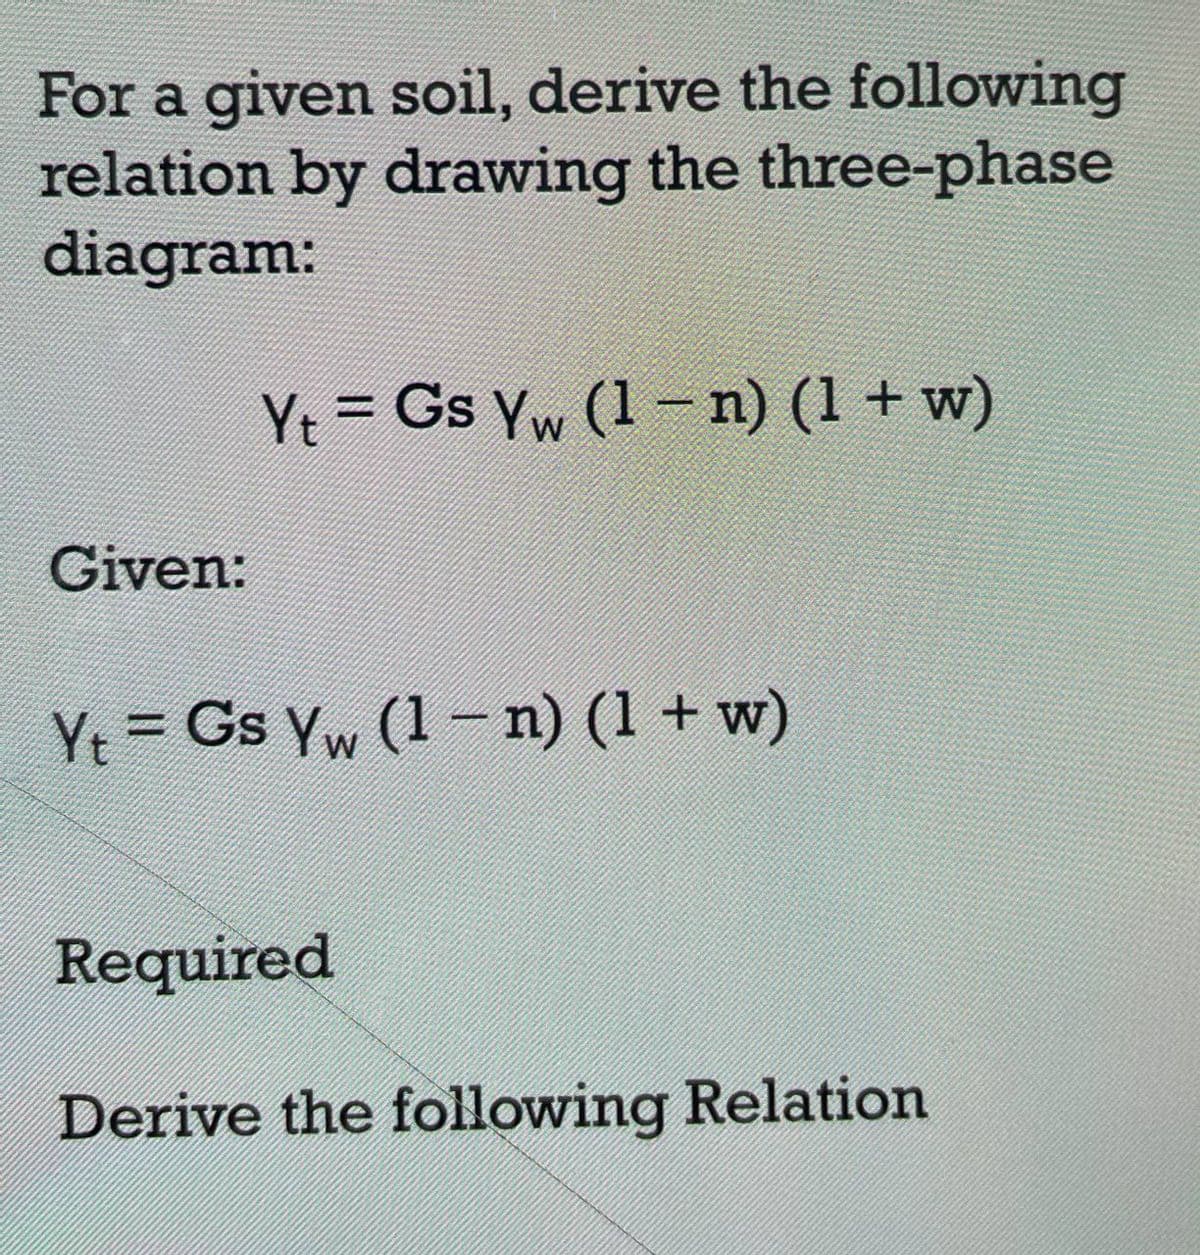 For a given soil, derive the following
relation by drawing the three-phase
diagram:
Given:
Yt = Gs Yw (1 − n) (1 + w)
W
Yt = Gs Yw (1 − n) (1 + w)
Required
Derive the following Relation